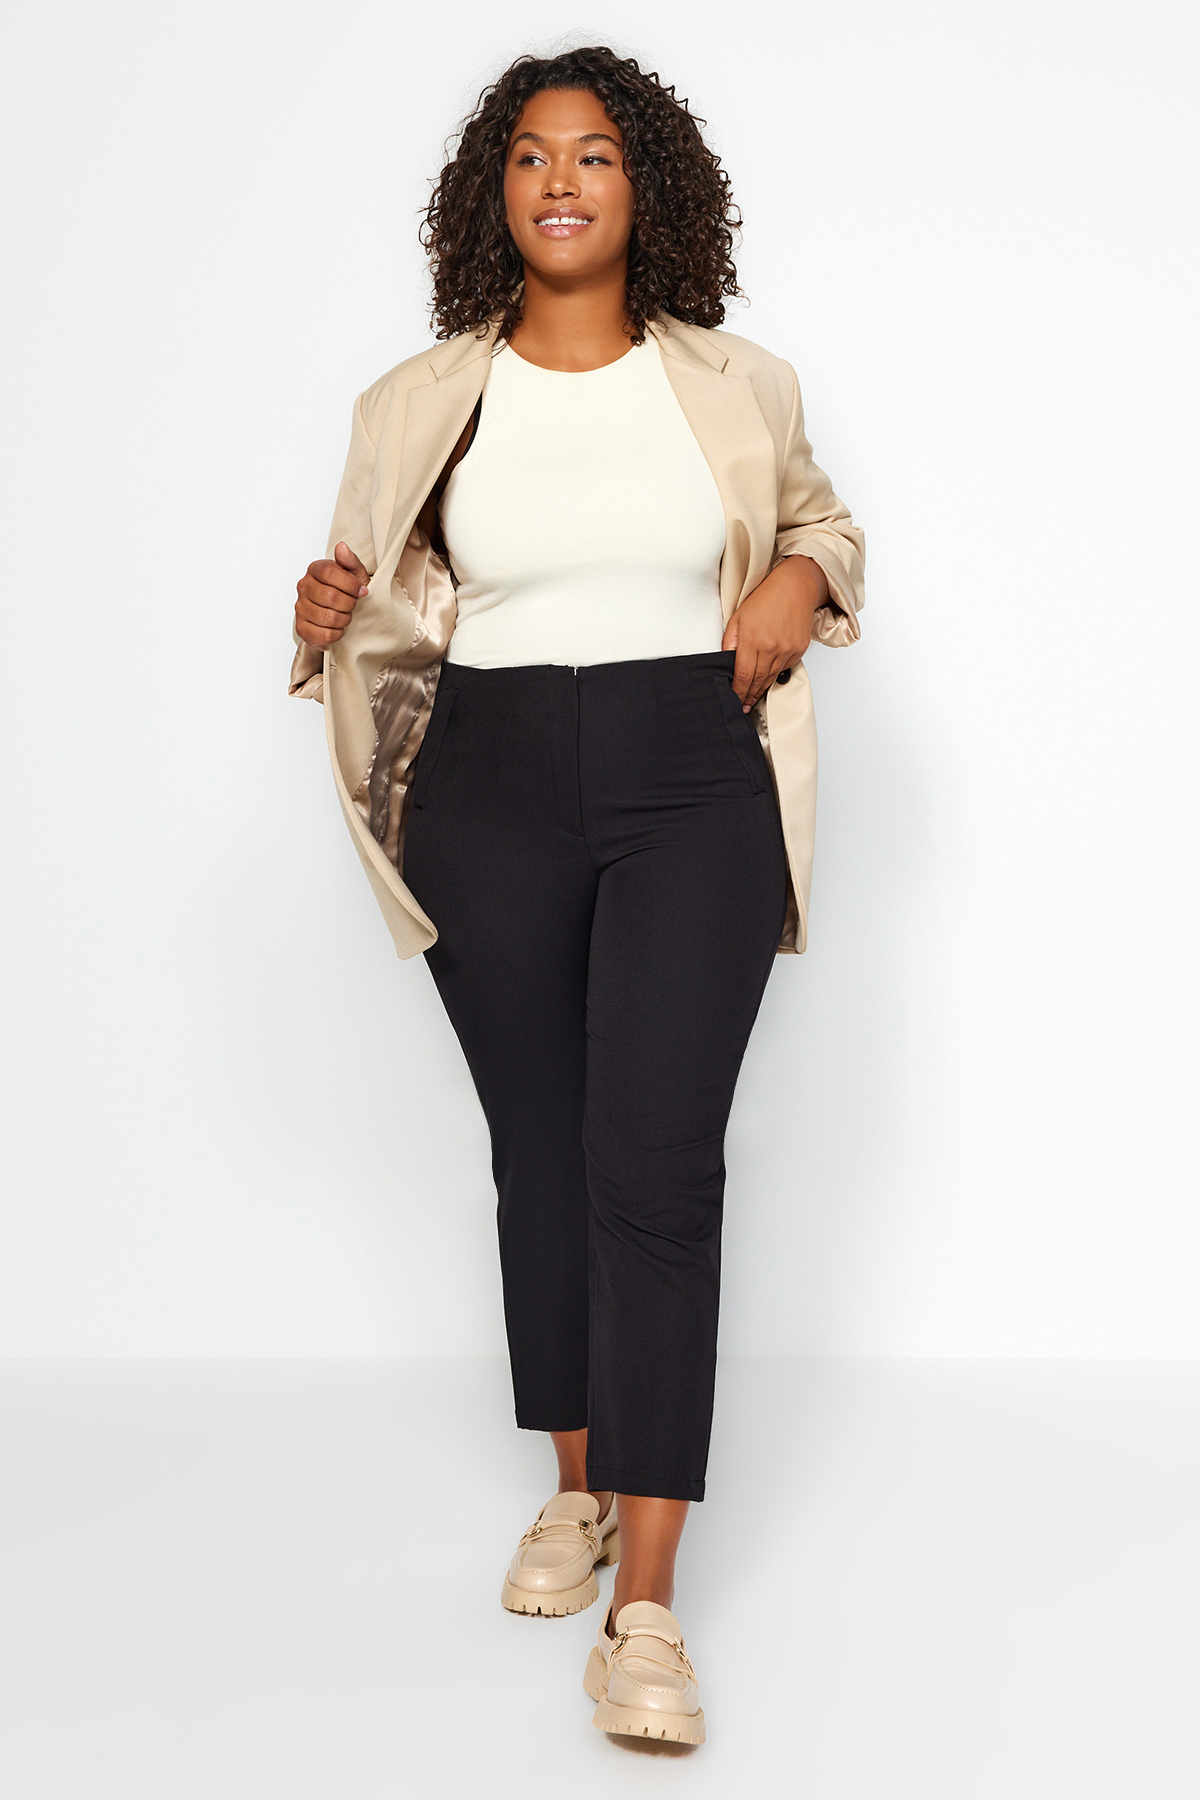 Cato Fashions | Cato Plus Size Navy Trouser Pants